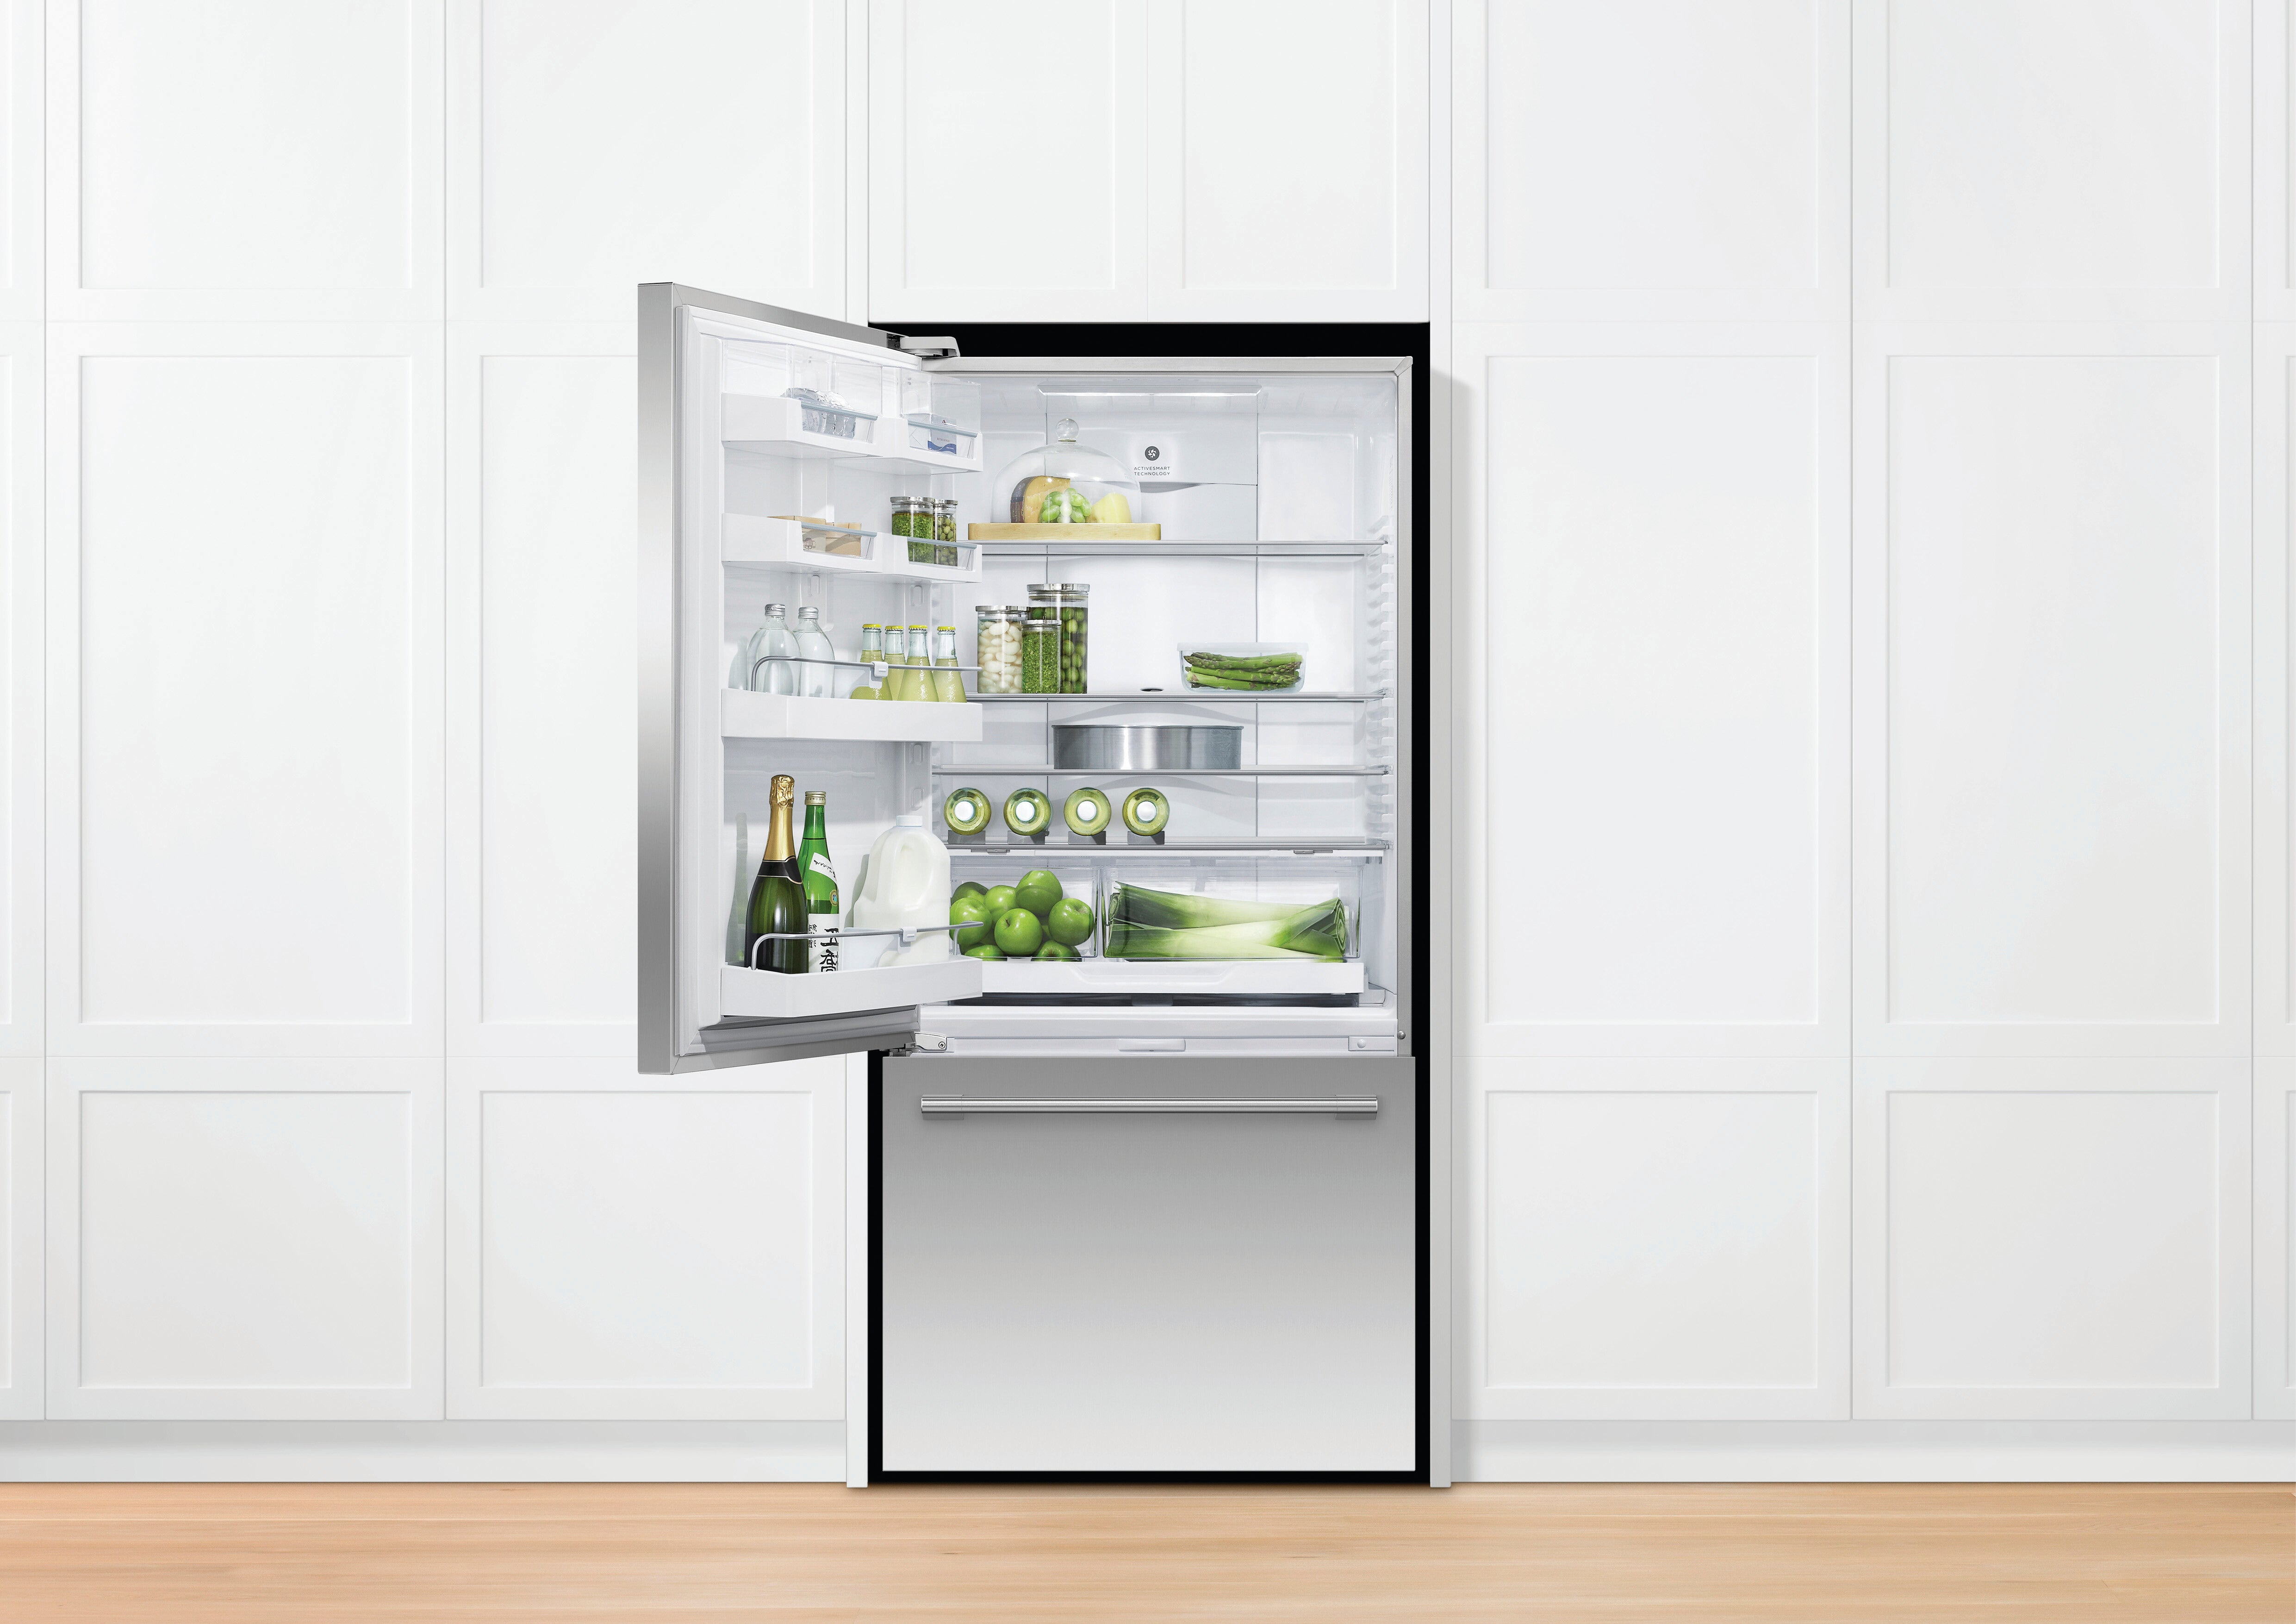 Fisher Paykel - 32 Inch 17.1 cu. ft Bottom Mount Refrigerator in Stainless - RF170WLHJX1